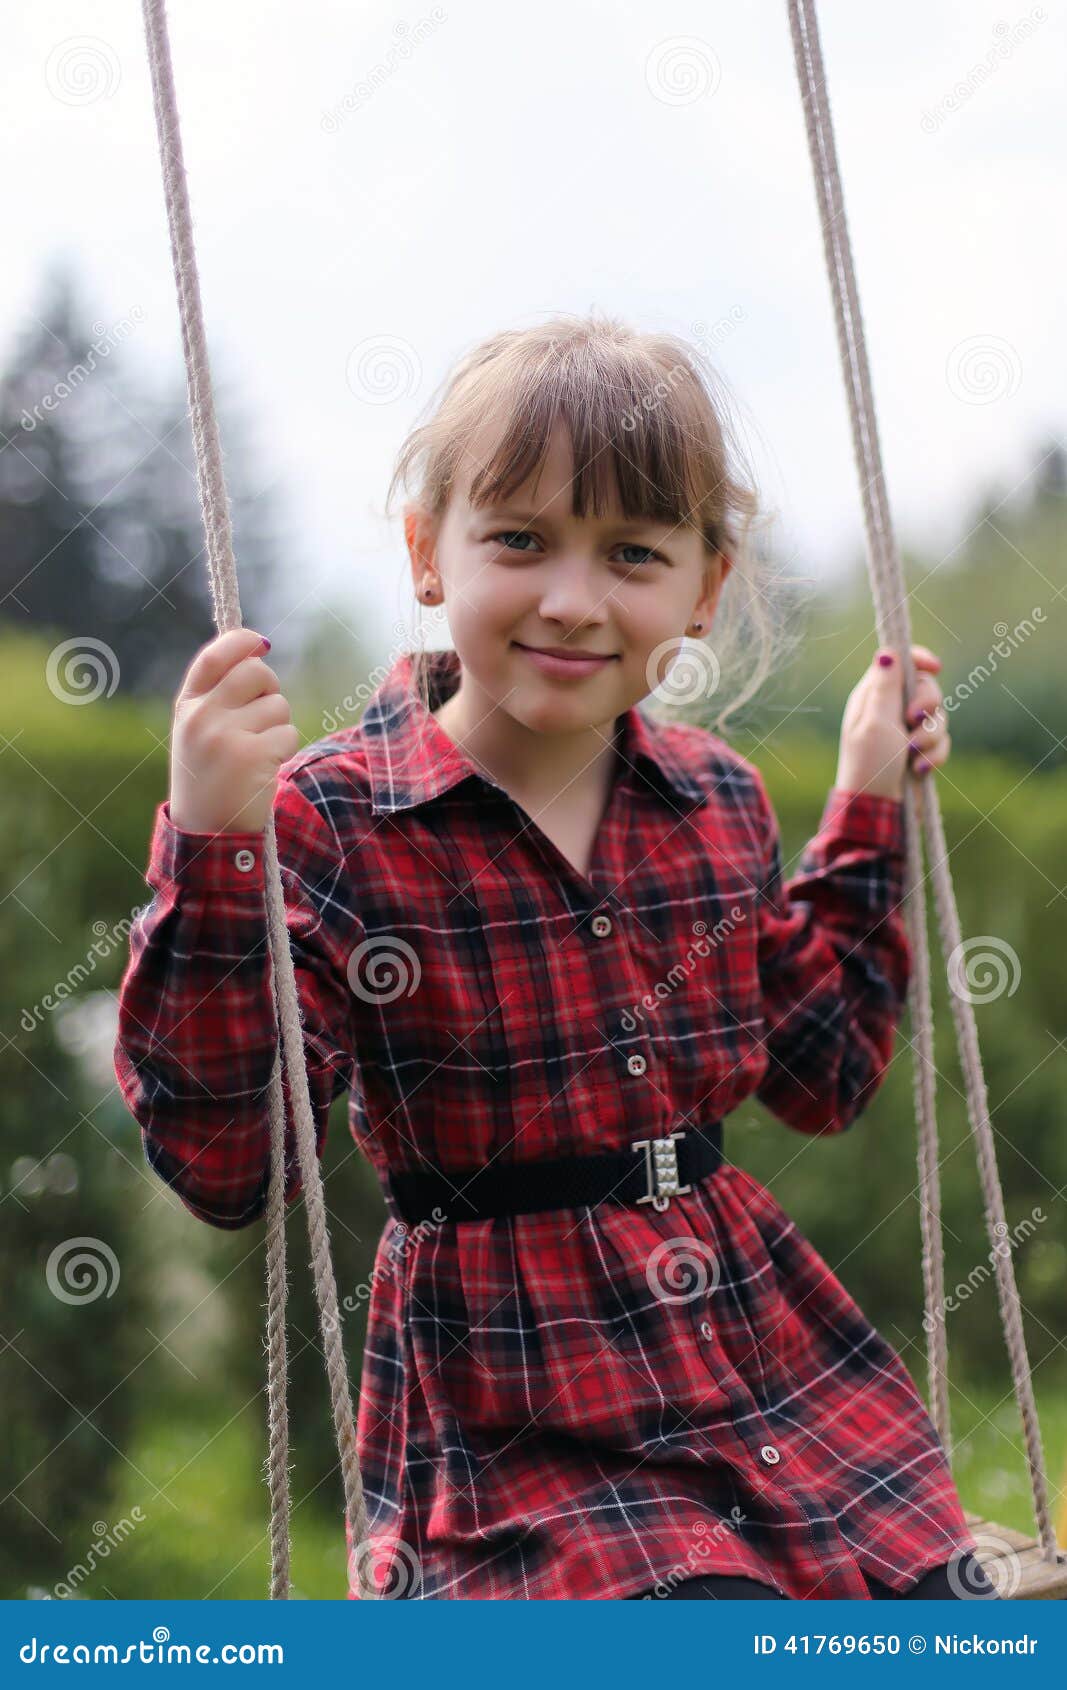 Little girl on a swing stock photo. Image of cute, swinging - 41769650